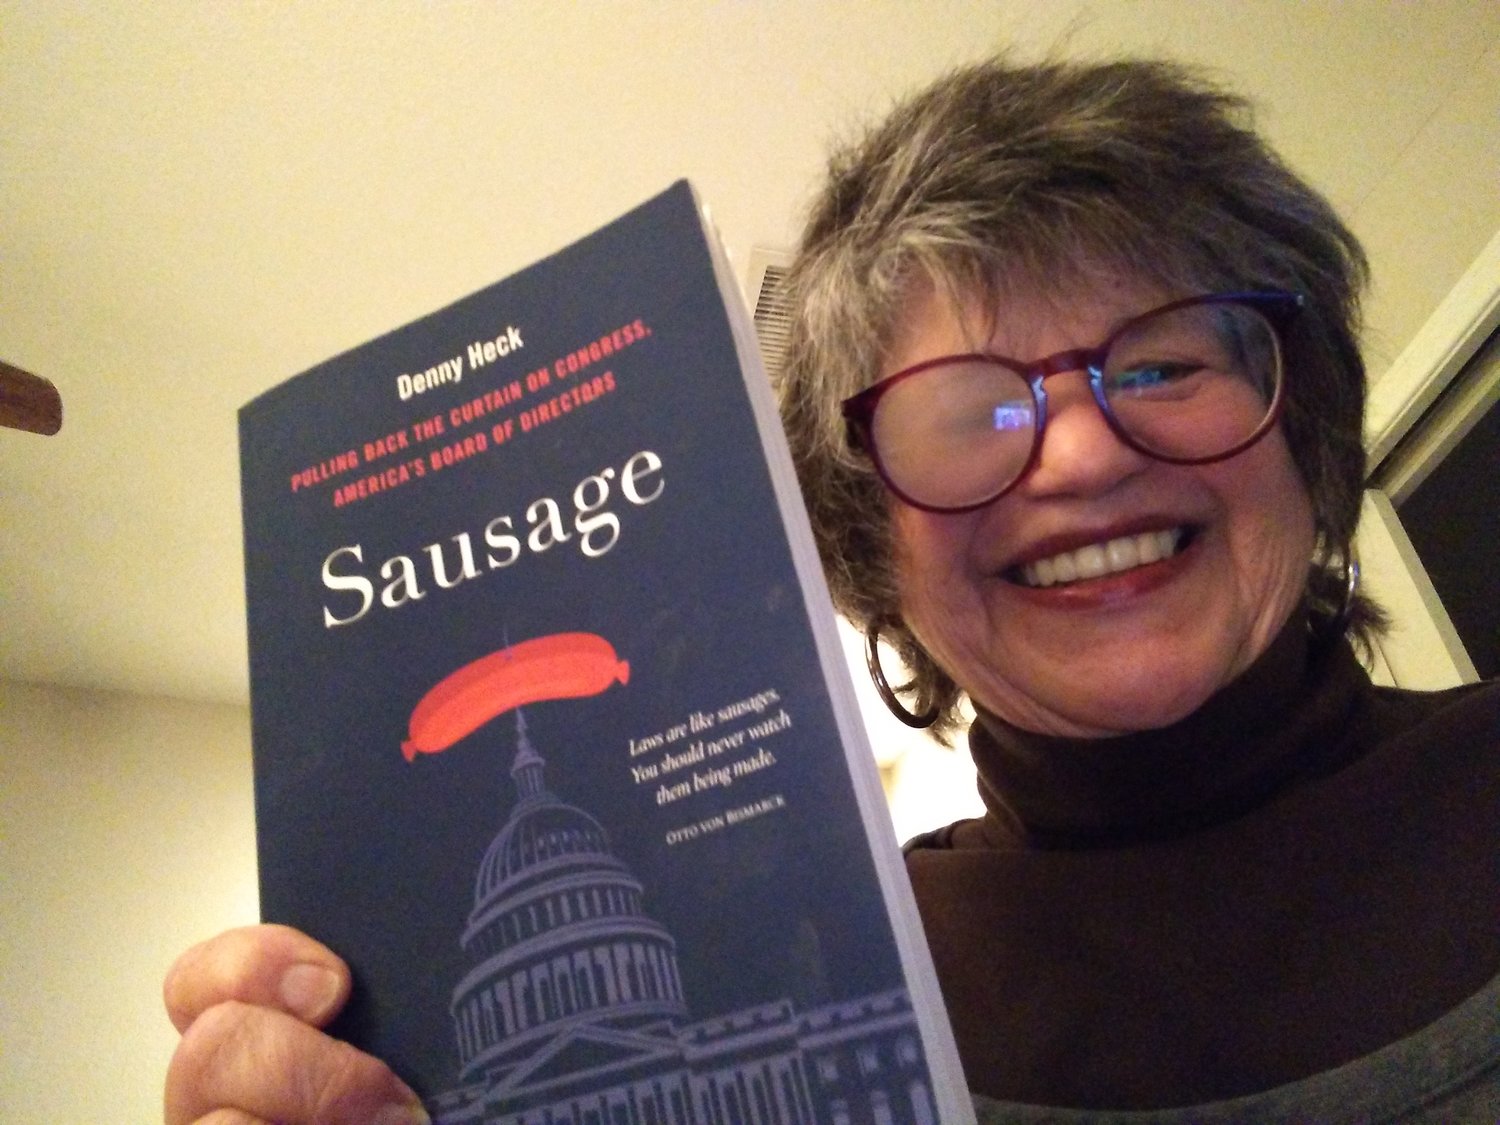 Marcia Hamilton is shown holding a rare paperbound copy of "Sausage," by Denny Heck